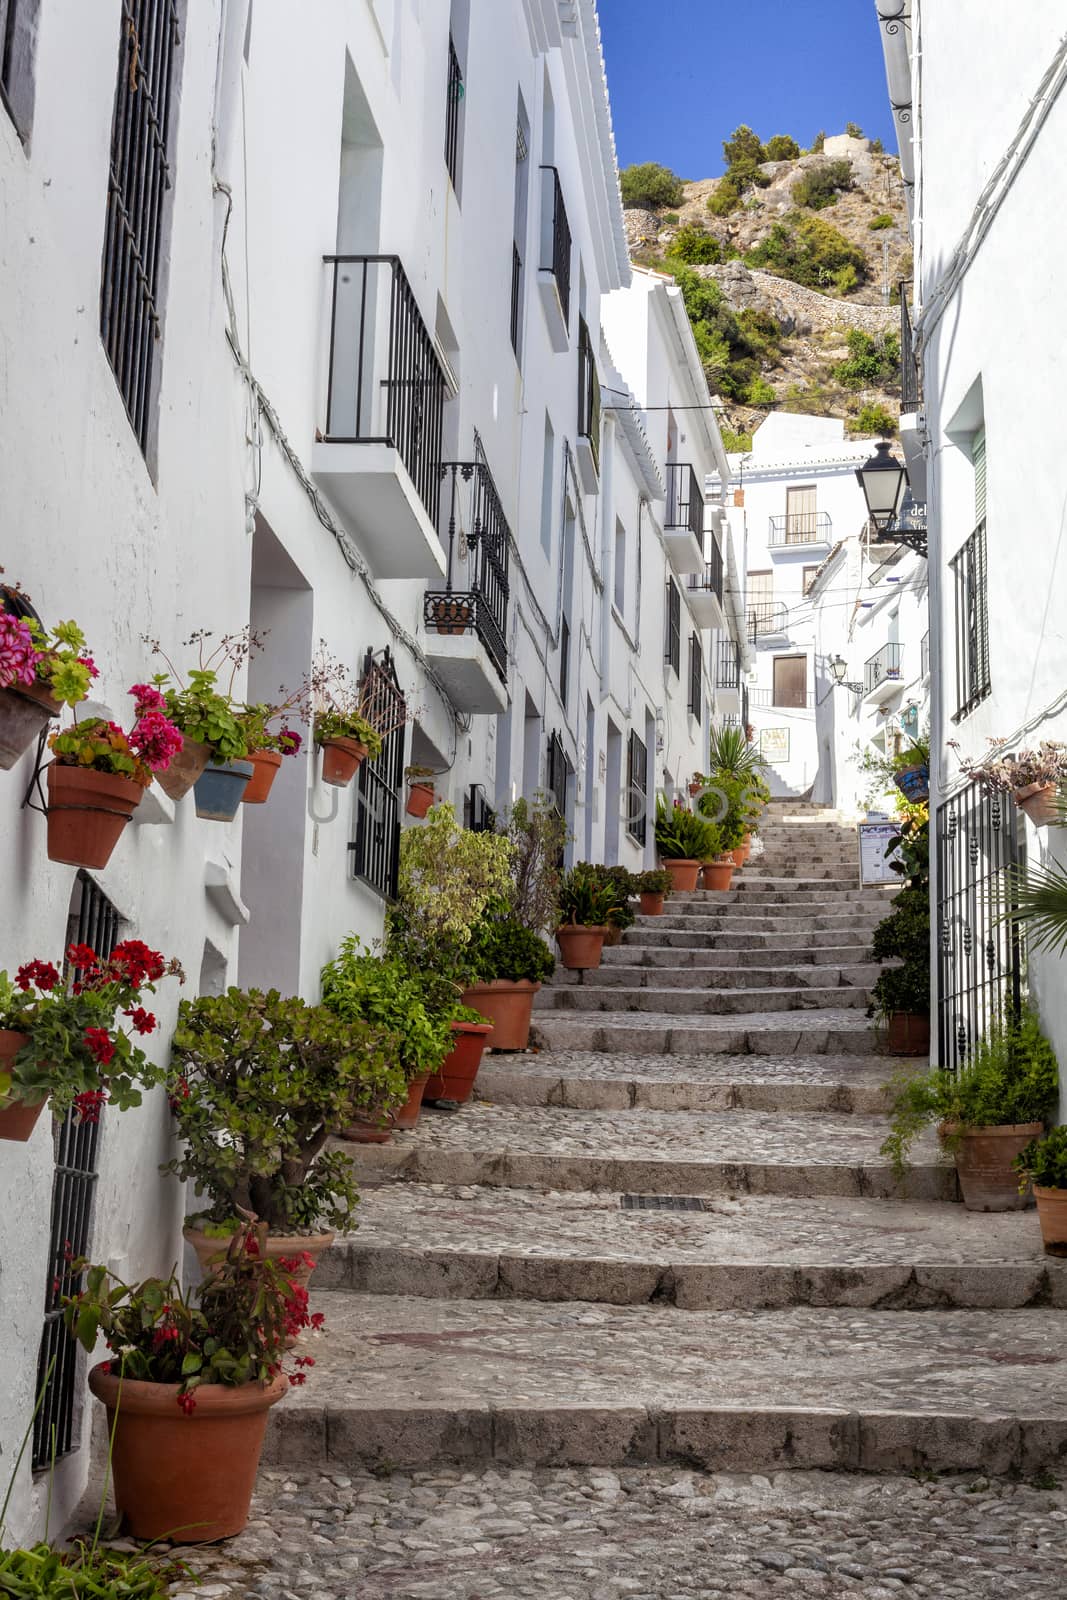 Small alley in a old town in Andalusia, Spain. Pavers and plants decorate the alley. Vertical photo